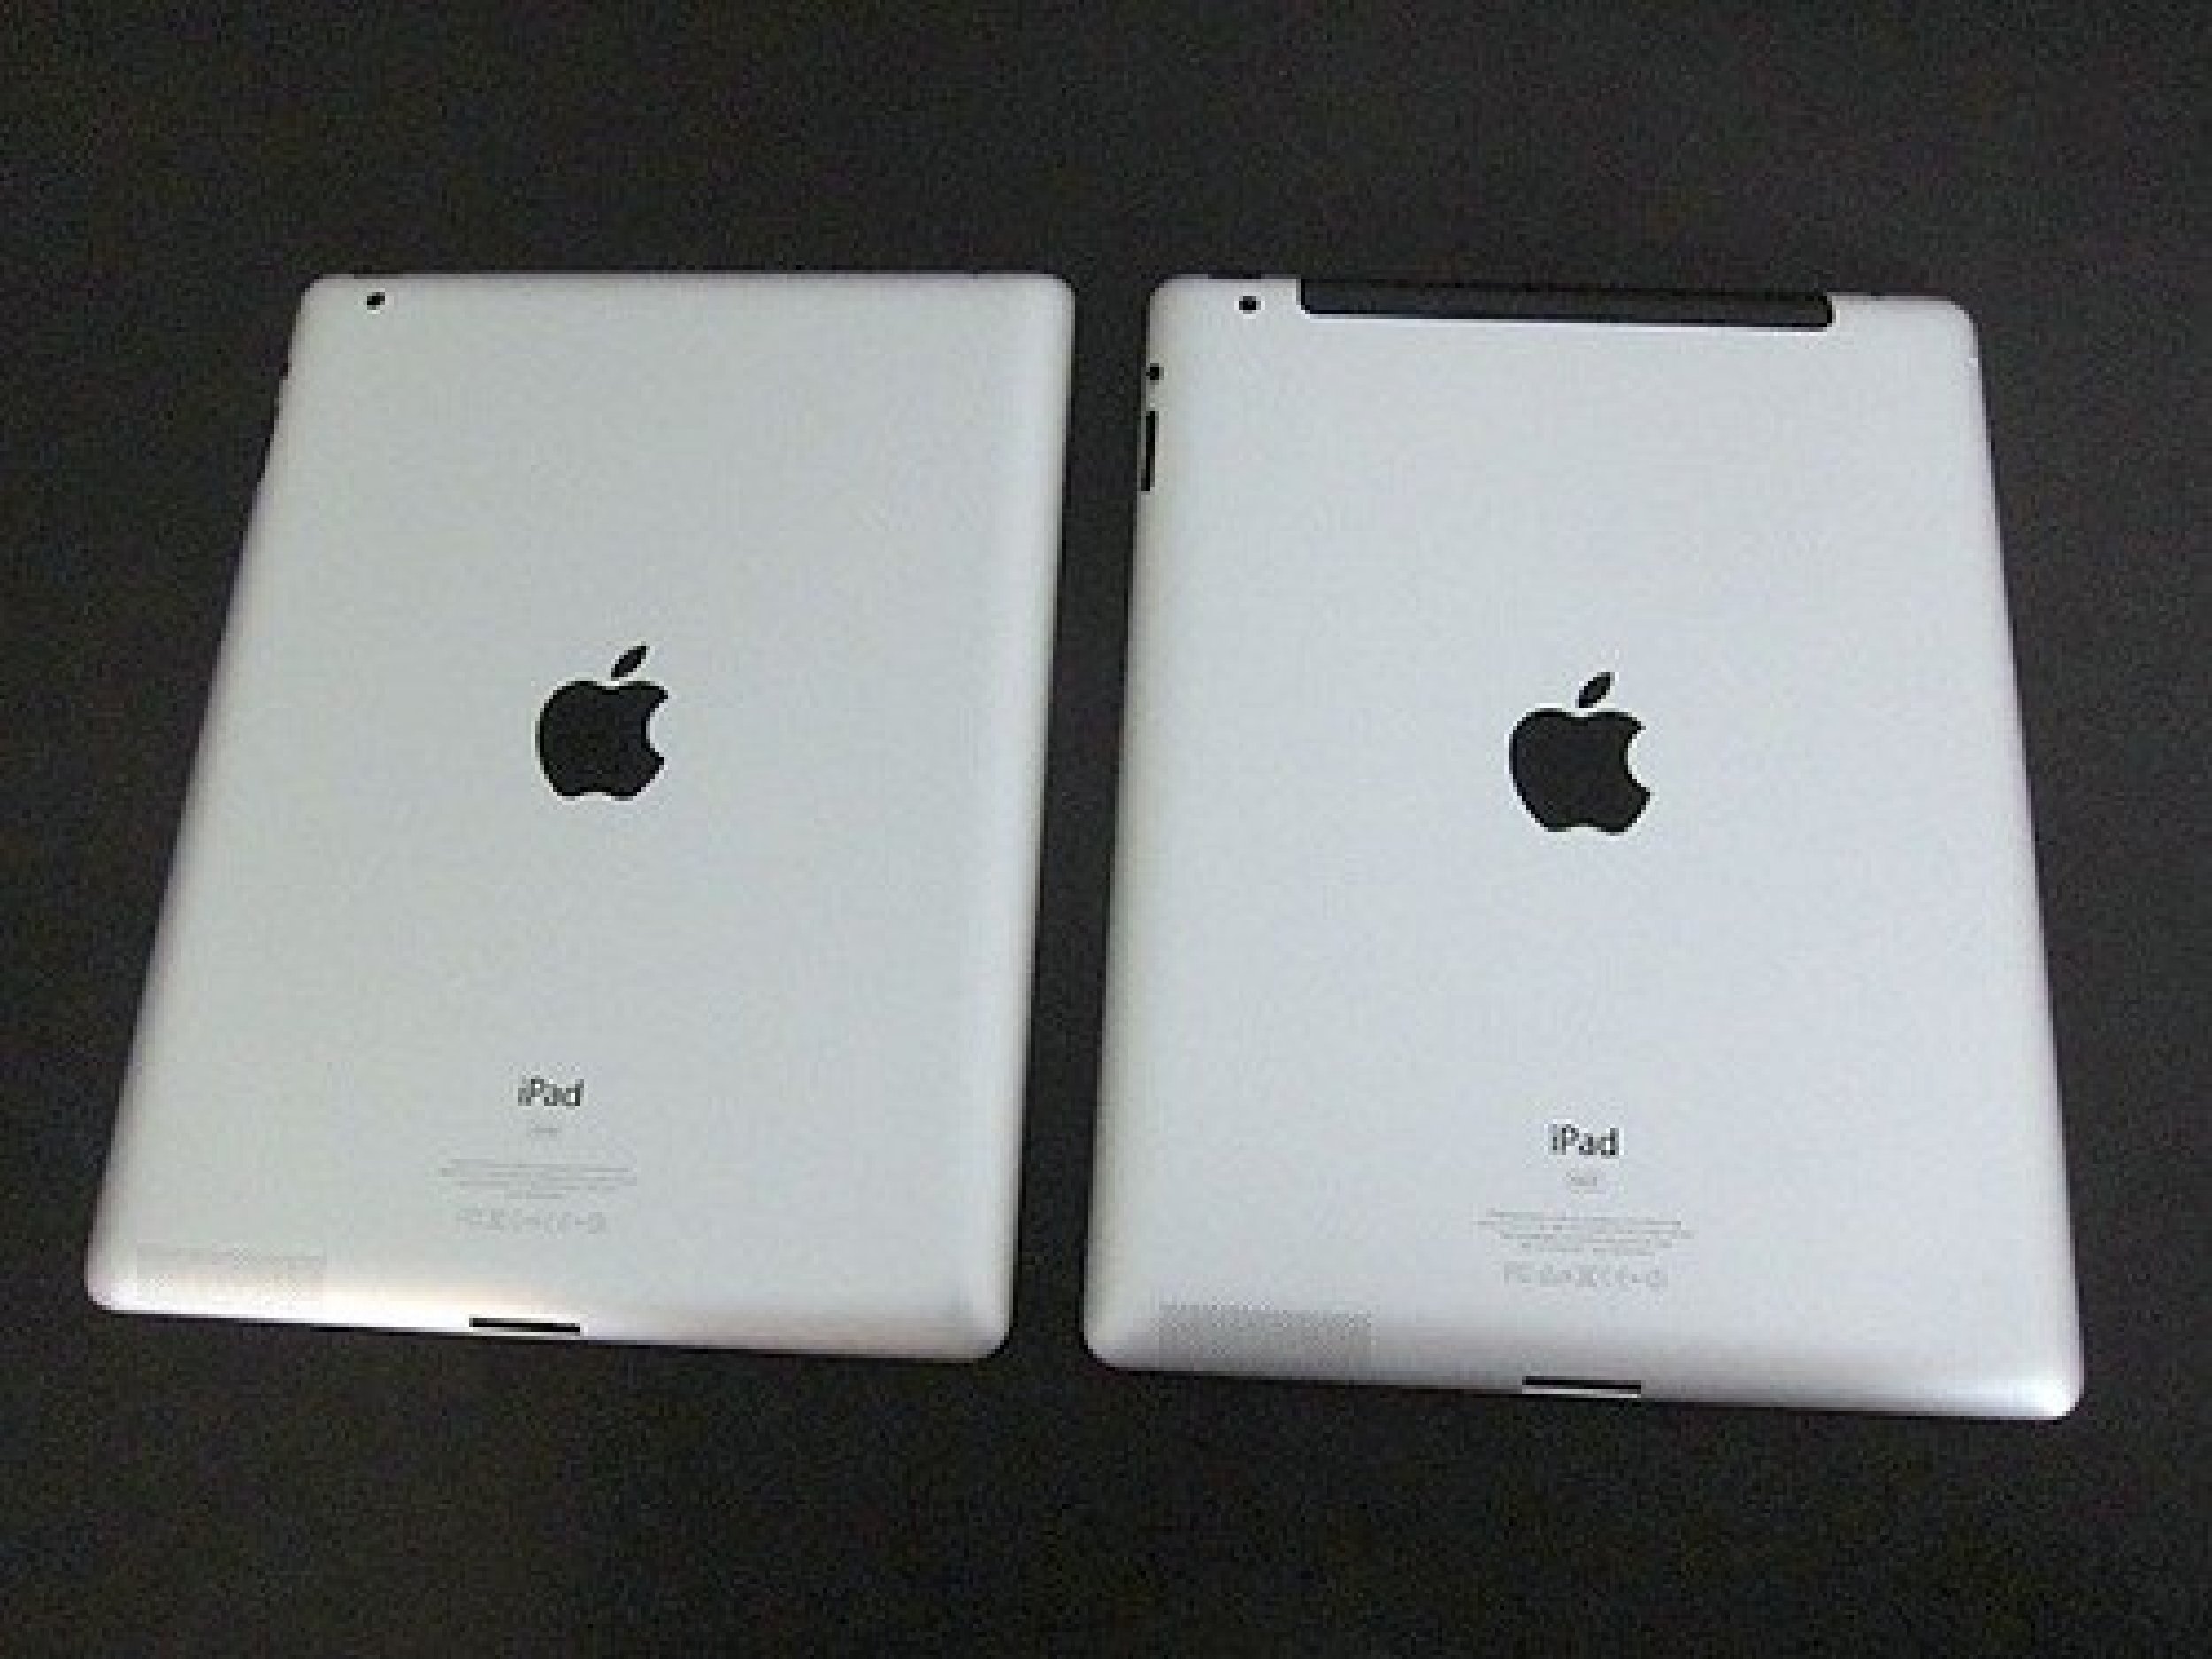 iPad 3 Features and Images Leaked